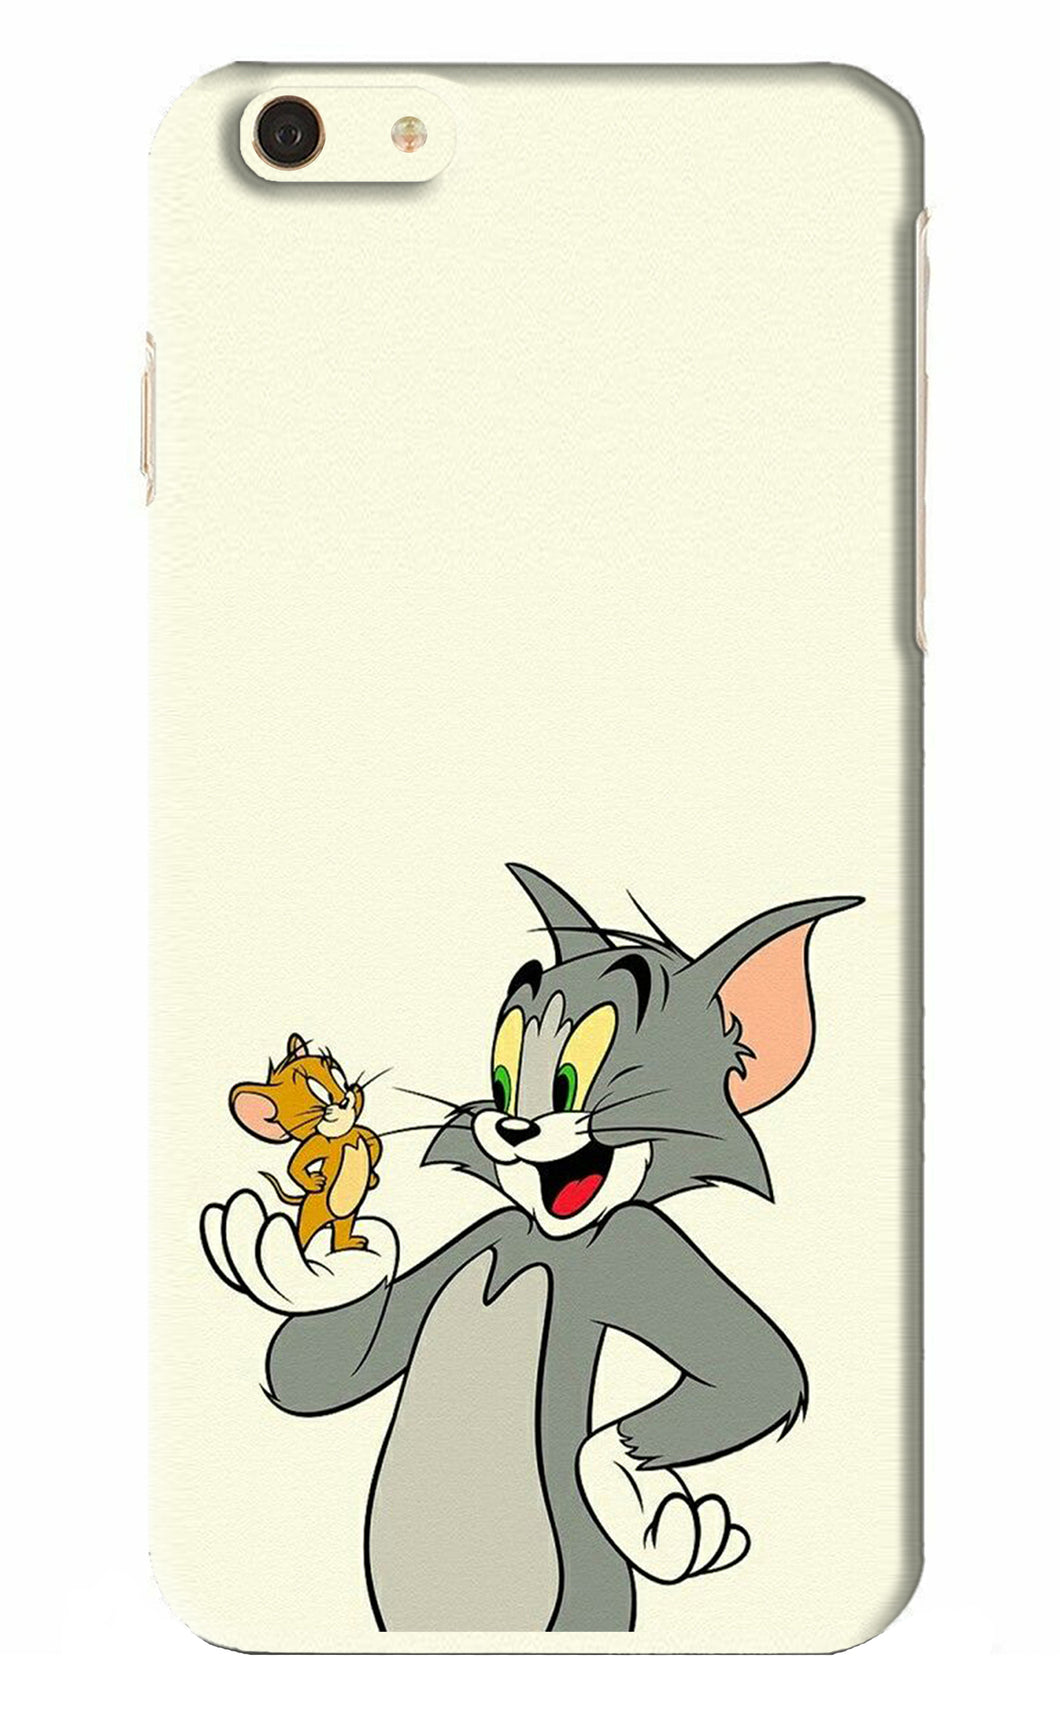 Tom & Jerry iPhone 6S Plus Back Skin Wrap